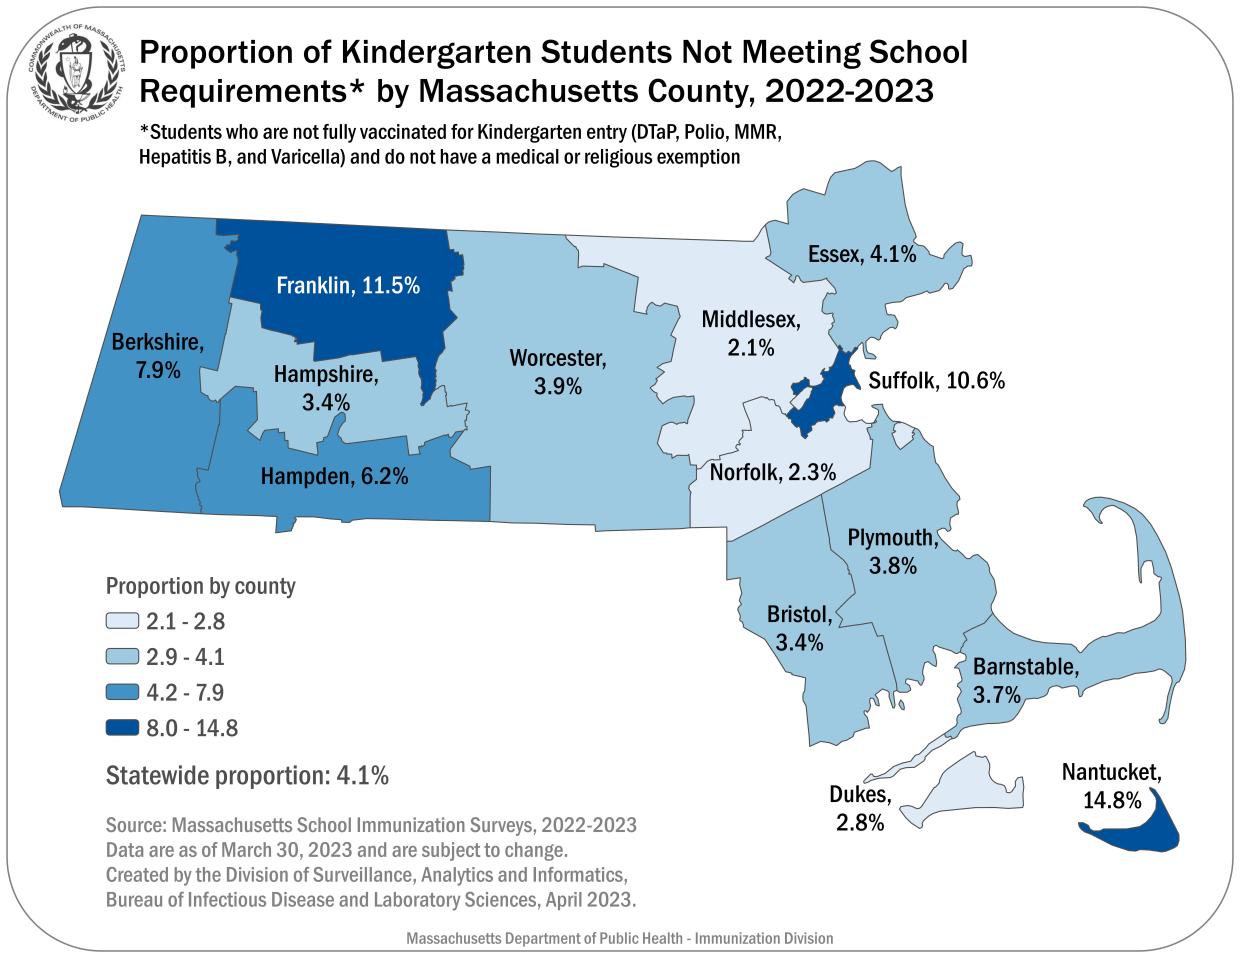 This map shows the proportion of Kindergarten Students by Massachusetts County Not Meeting School Requirements, 2022-2023. These data are current as of March 30, 2023 and are subject to change. The source of these data is via the Massachusetts School Immunization Surveys 2022-2023. State average 4.1% Barnstable 3.7% Berkshire 7.9% Bristol 3.4% Dukes 2.8% Hampden 6.2% Hampshire 3.4% Essex 4.1% Franklin 11.5% Middlesex 2.1% Nantucket 14.8% Norfolk 2.3% Plymouth: 3.8% Suffolk 10.6% Worcester 3.9%